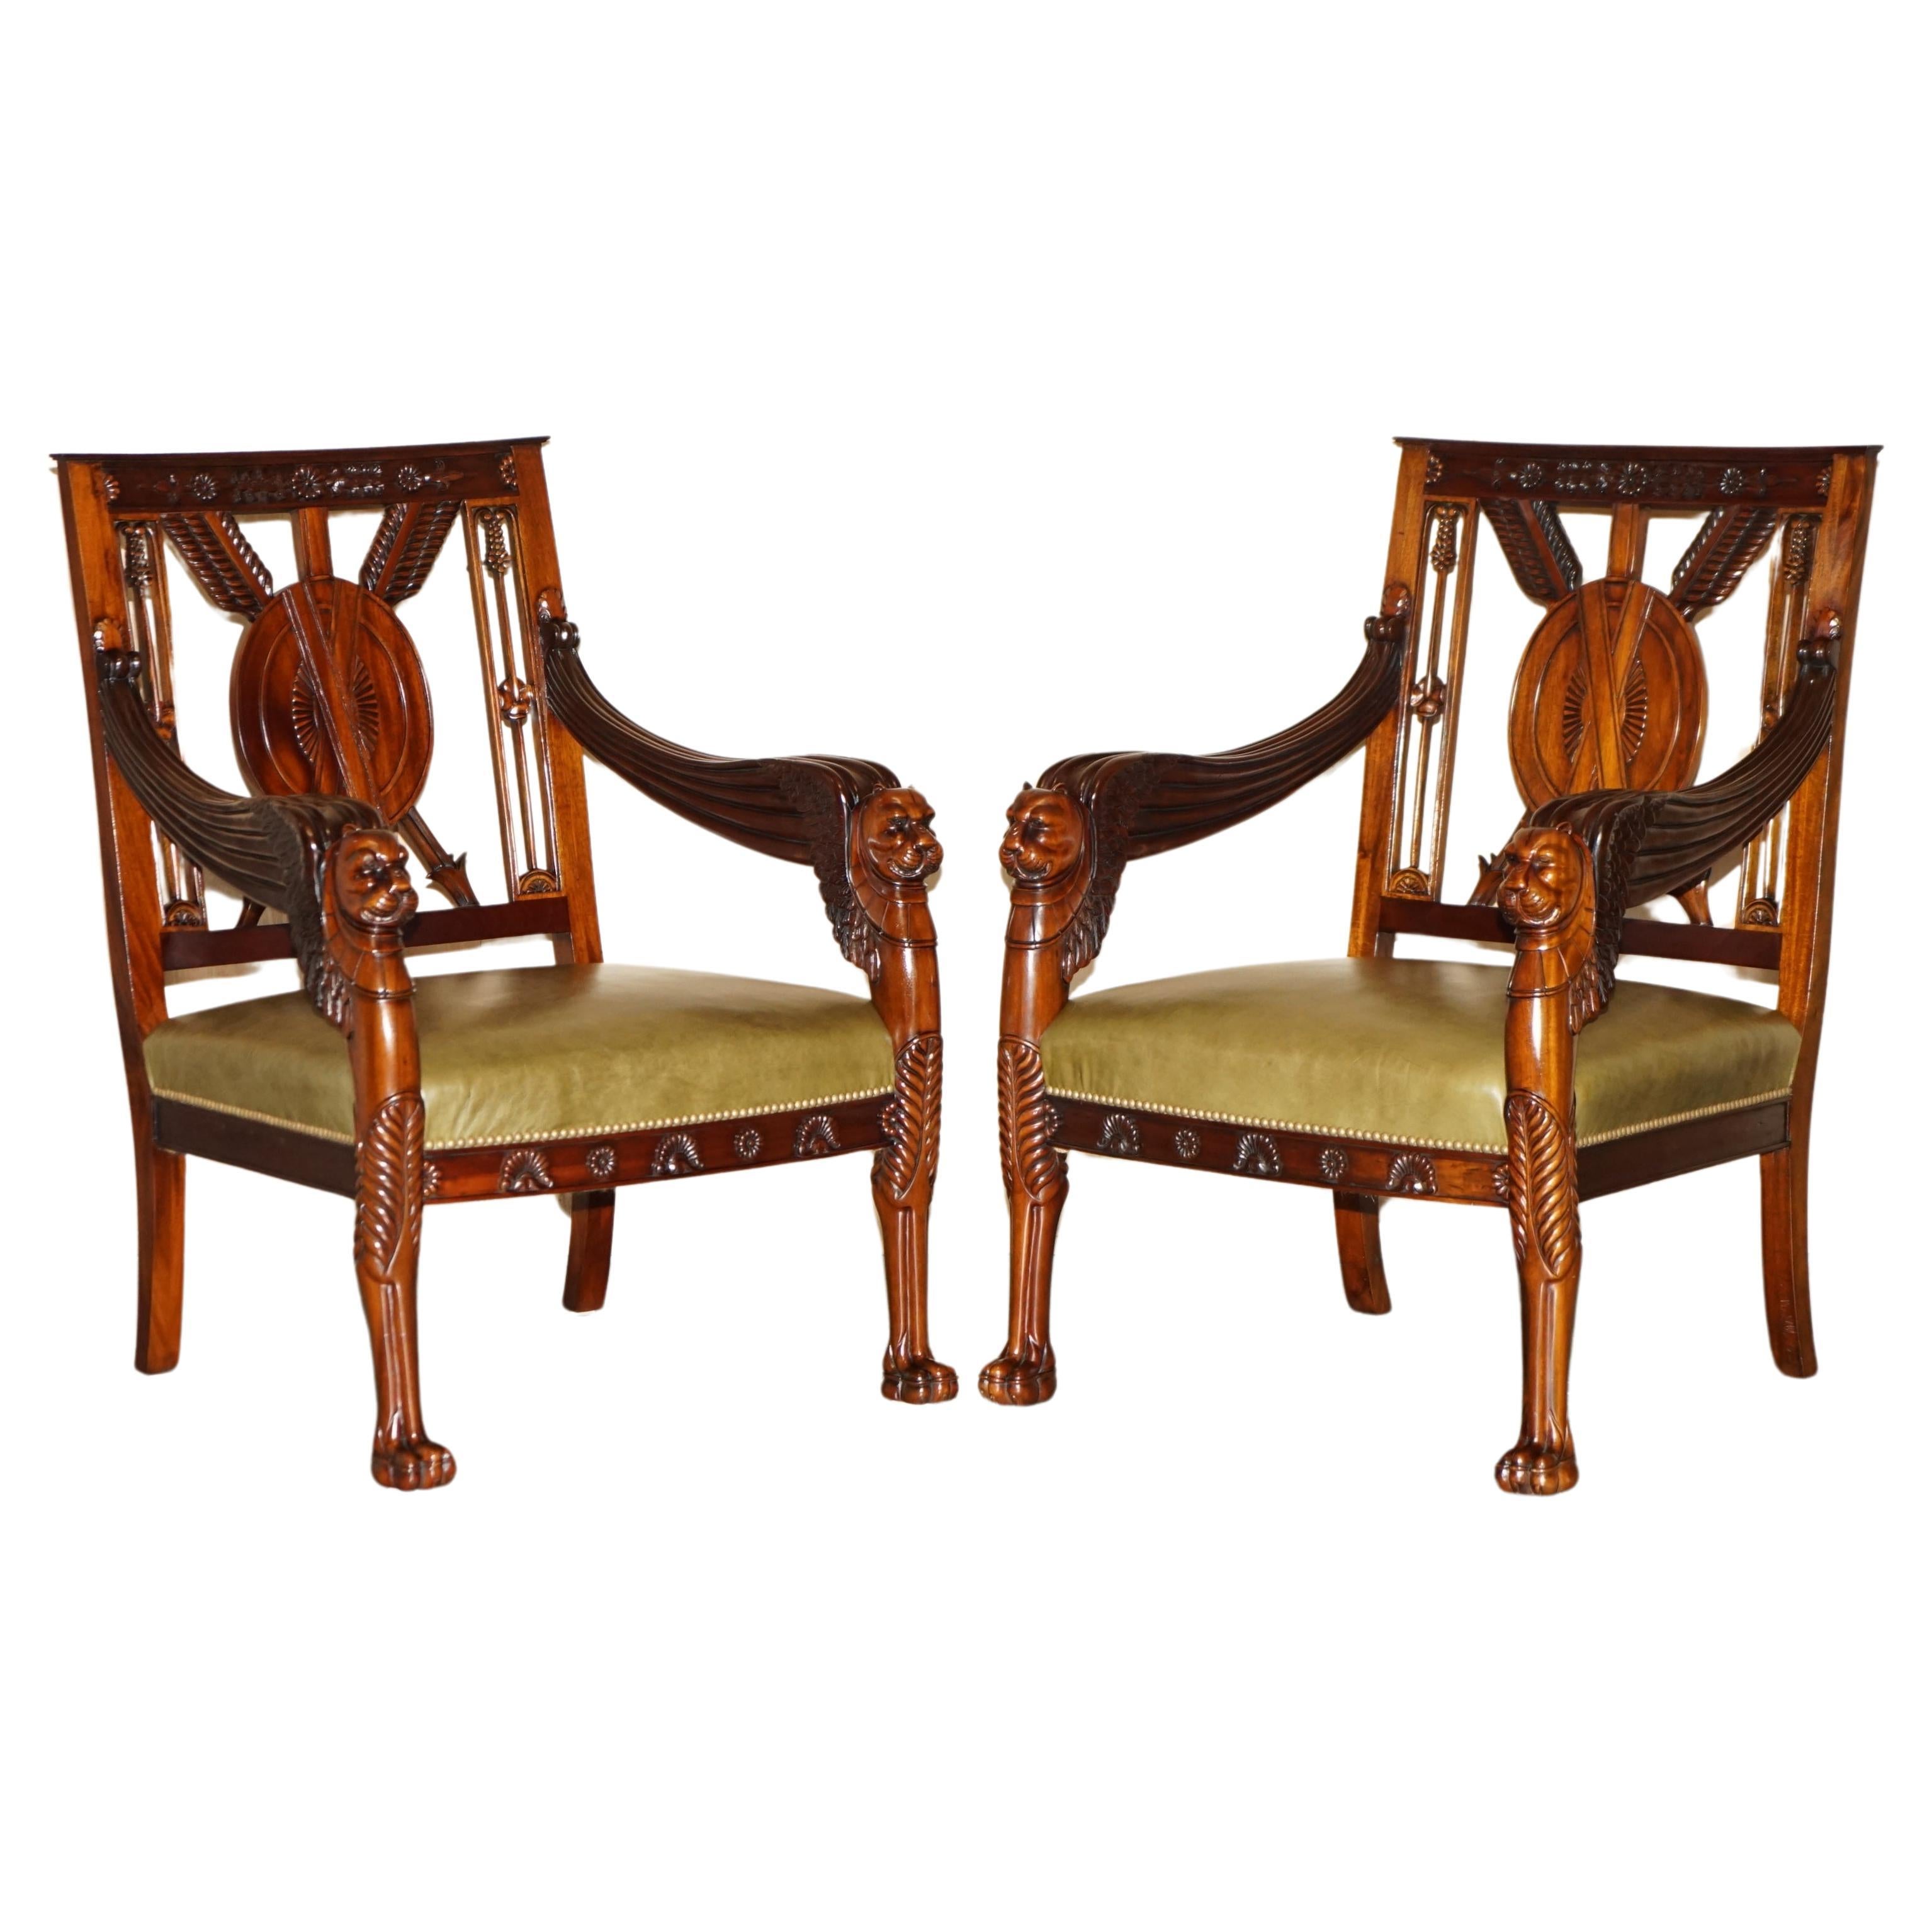 EXQUISITE PAIR OF HAND CARved HARDWOOD LiBRARY ARMCHAIRS LION GRIFFON WING ARMS im Angebot